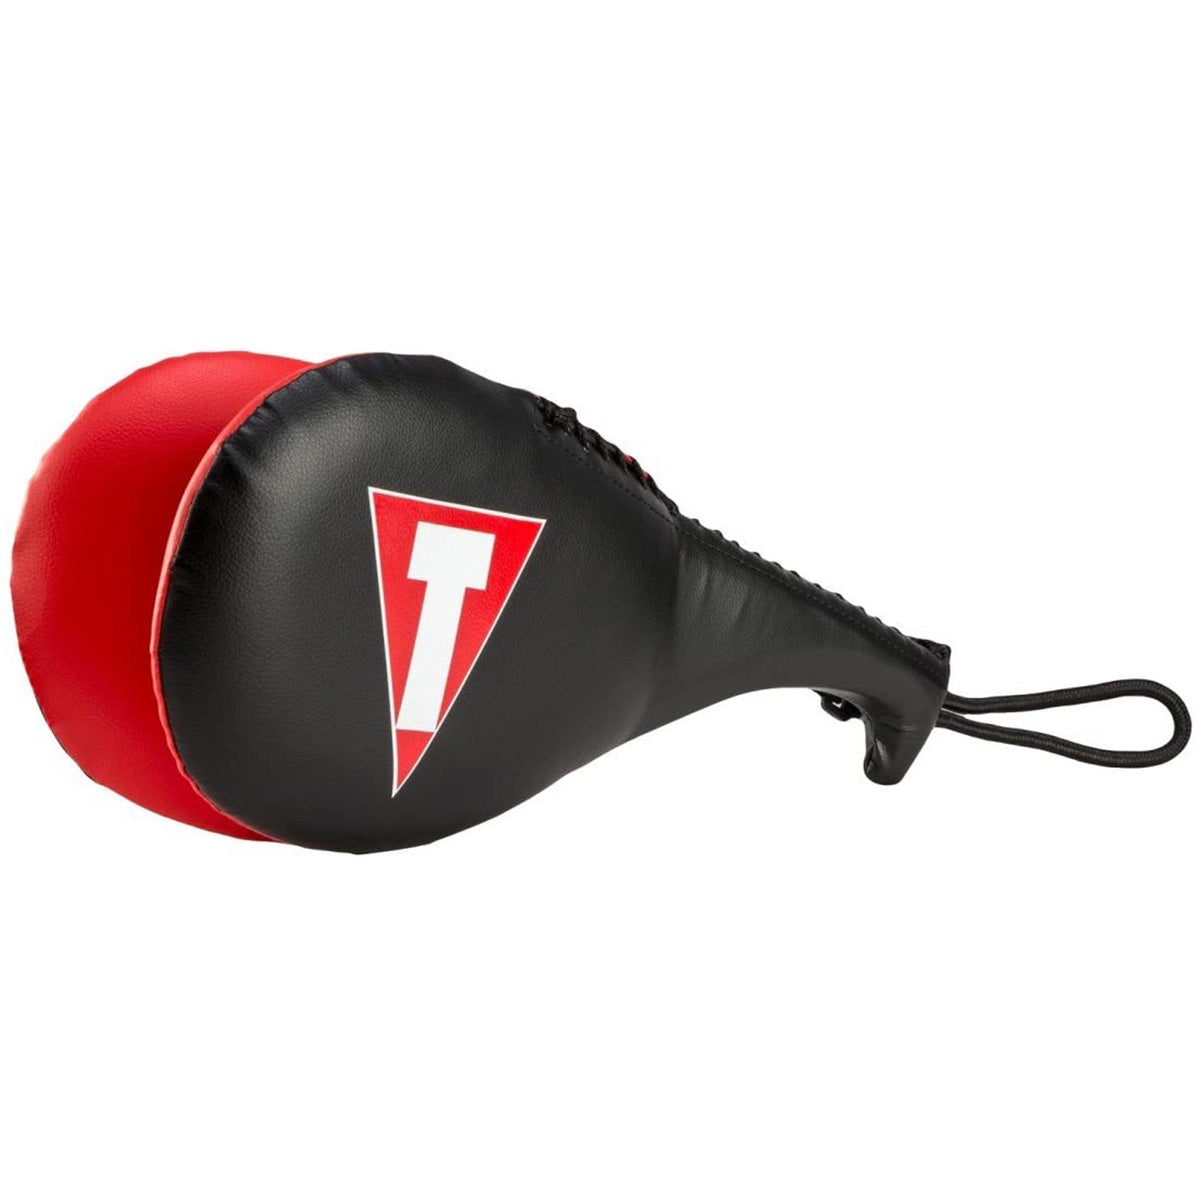 Title Boxing Duo Target Training Paddle Title Boxing